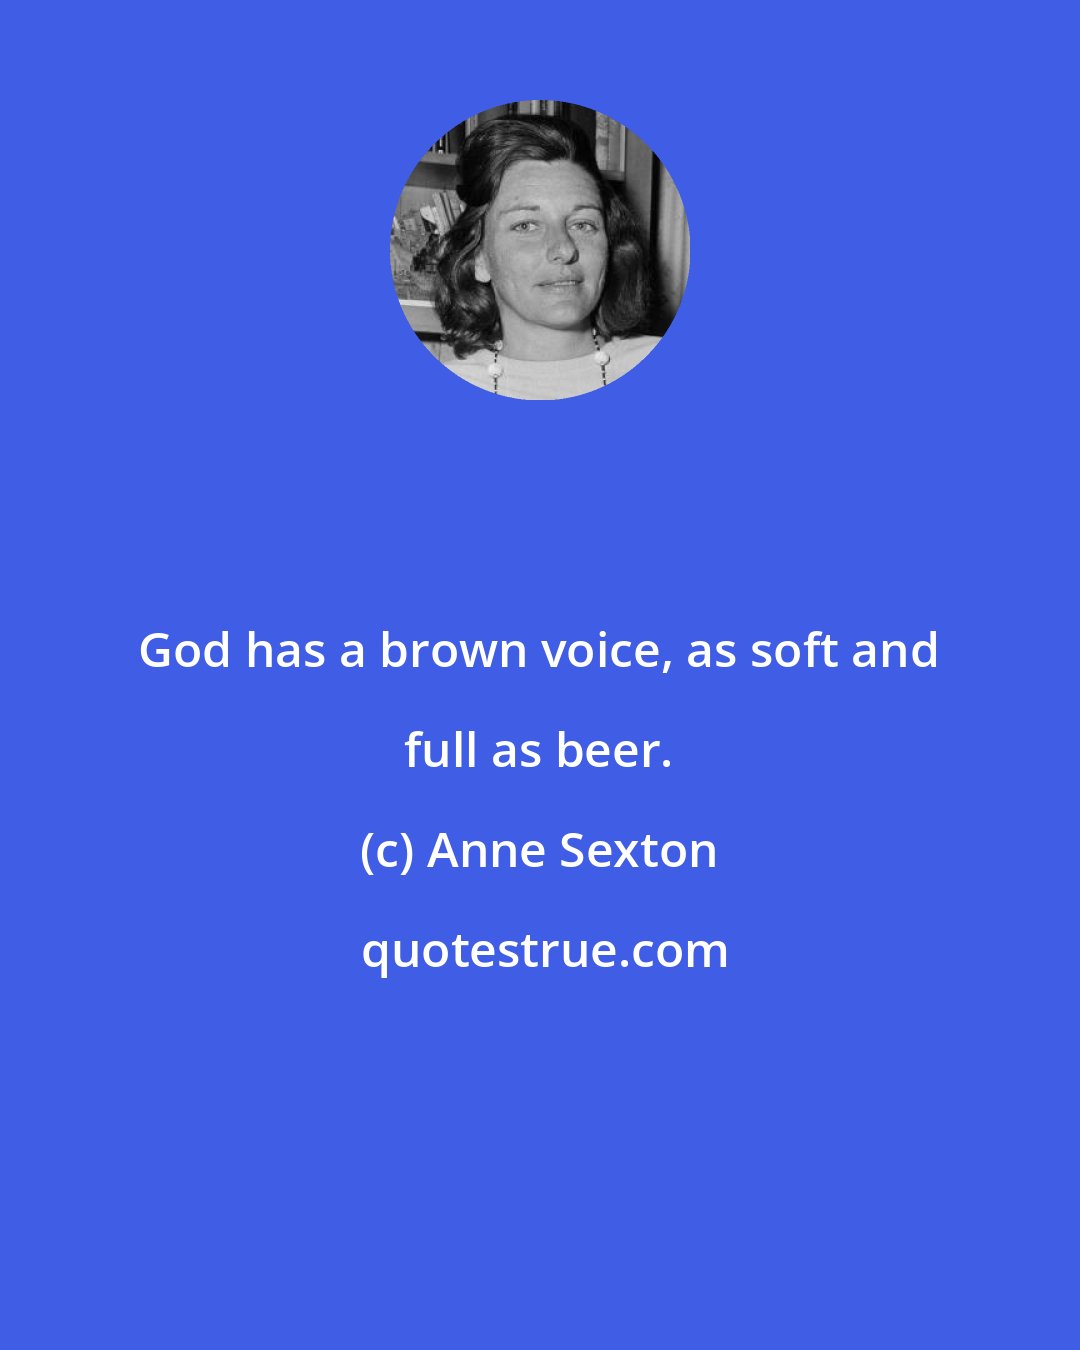 Anne Sexton: God has a brown voice, as soft and full as beer.